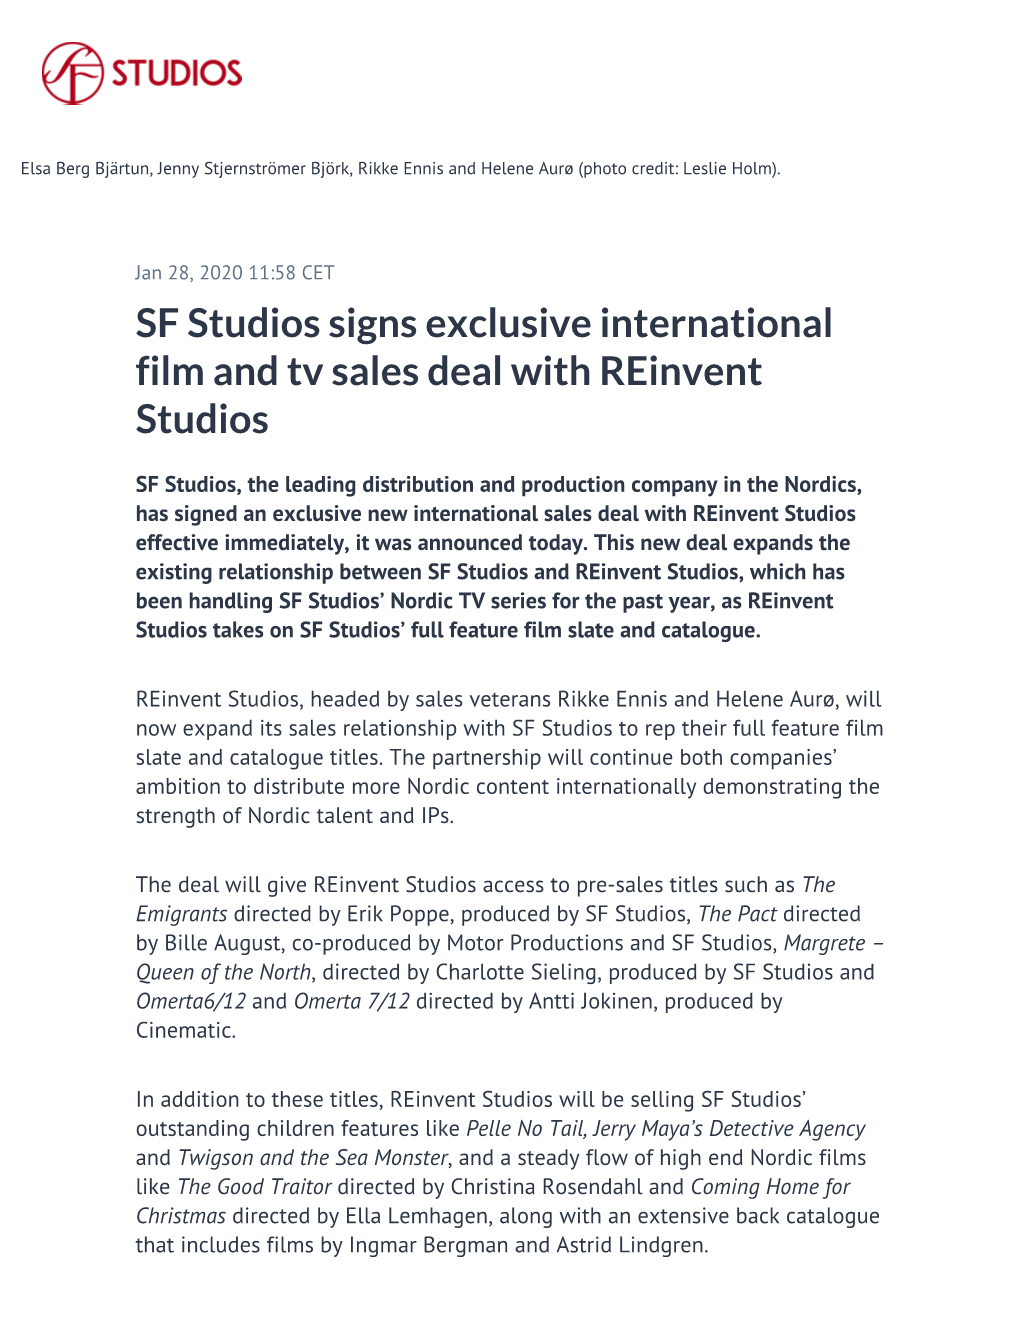 SF Studios Signs Exclusive International Film and Tv Sales Deal with Reinvent Studios